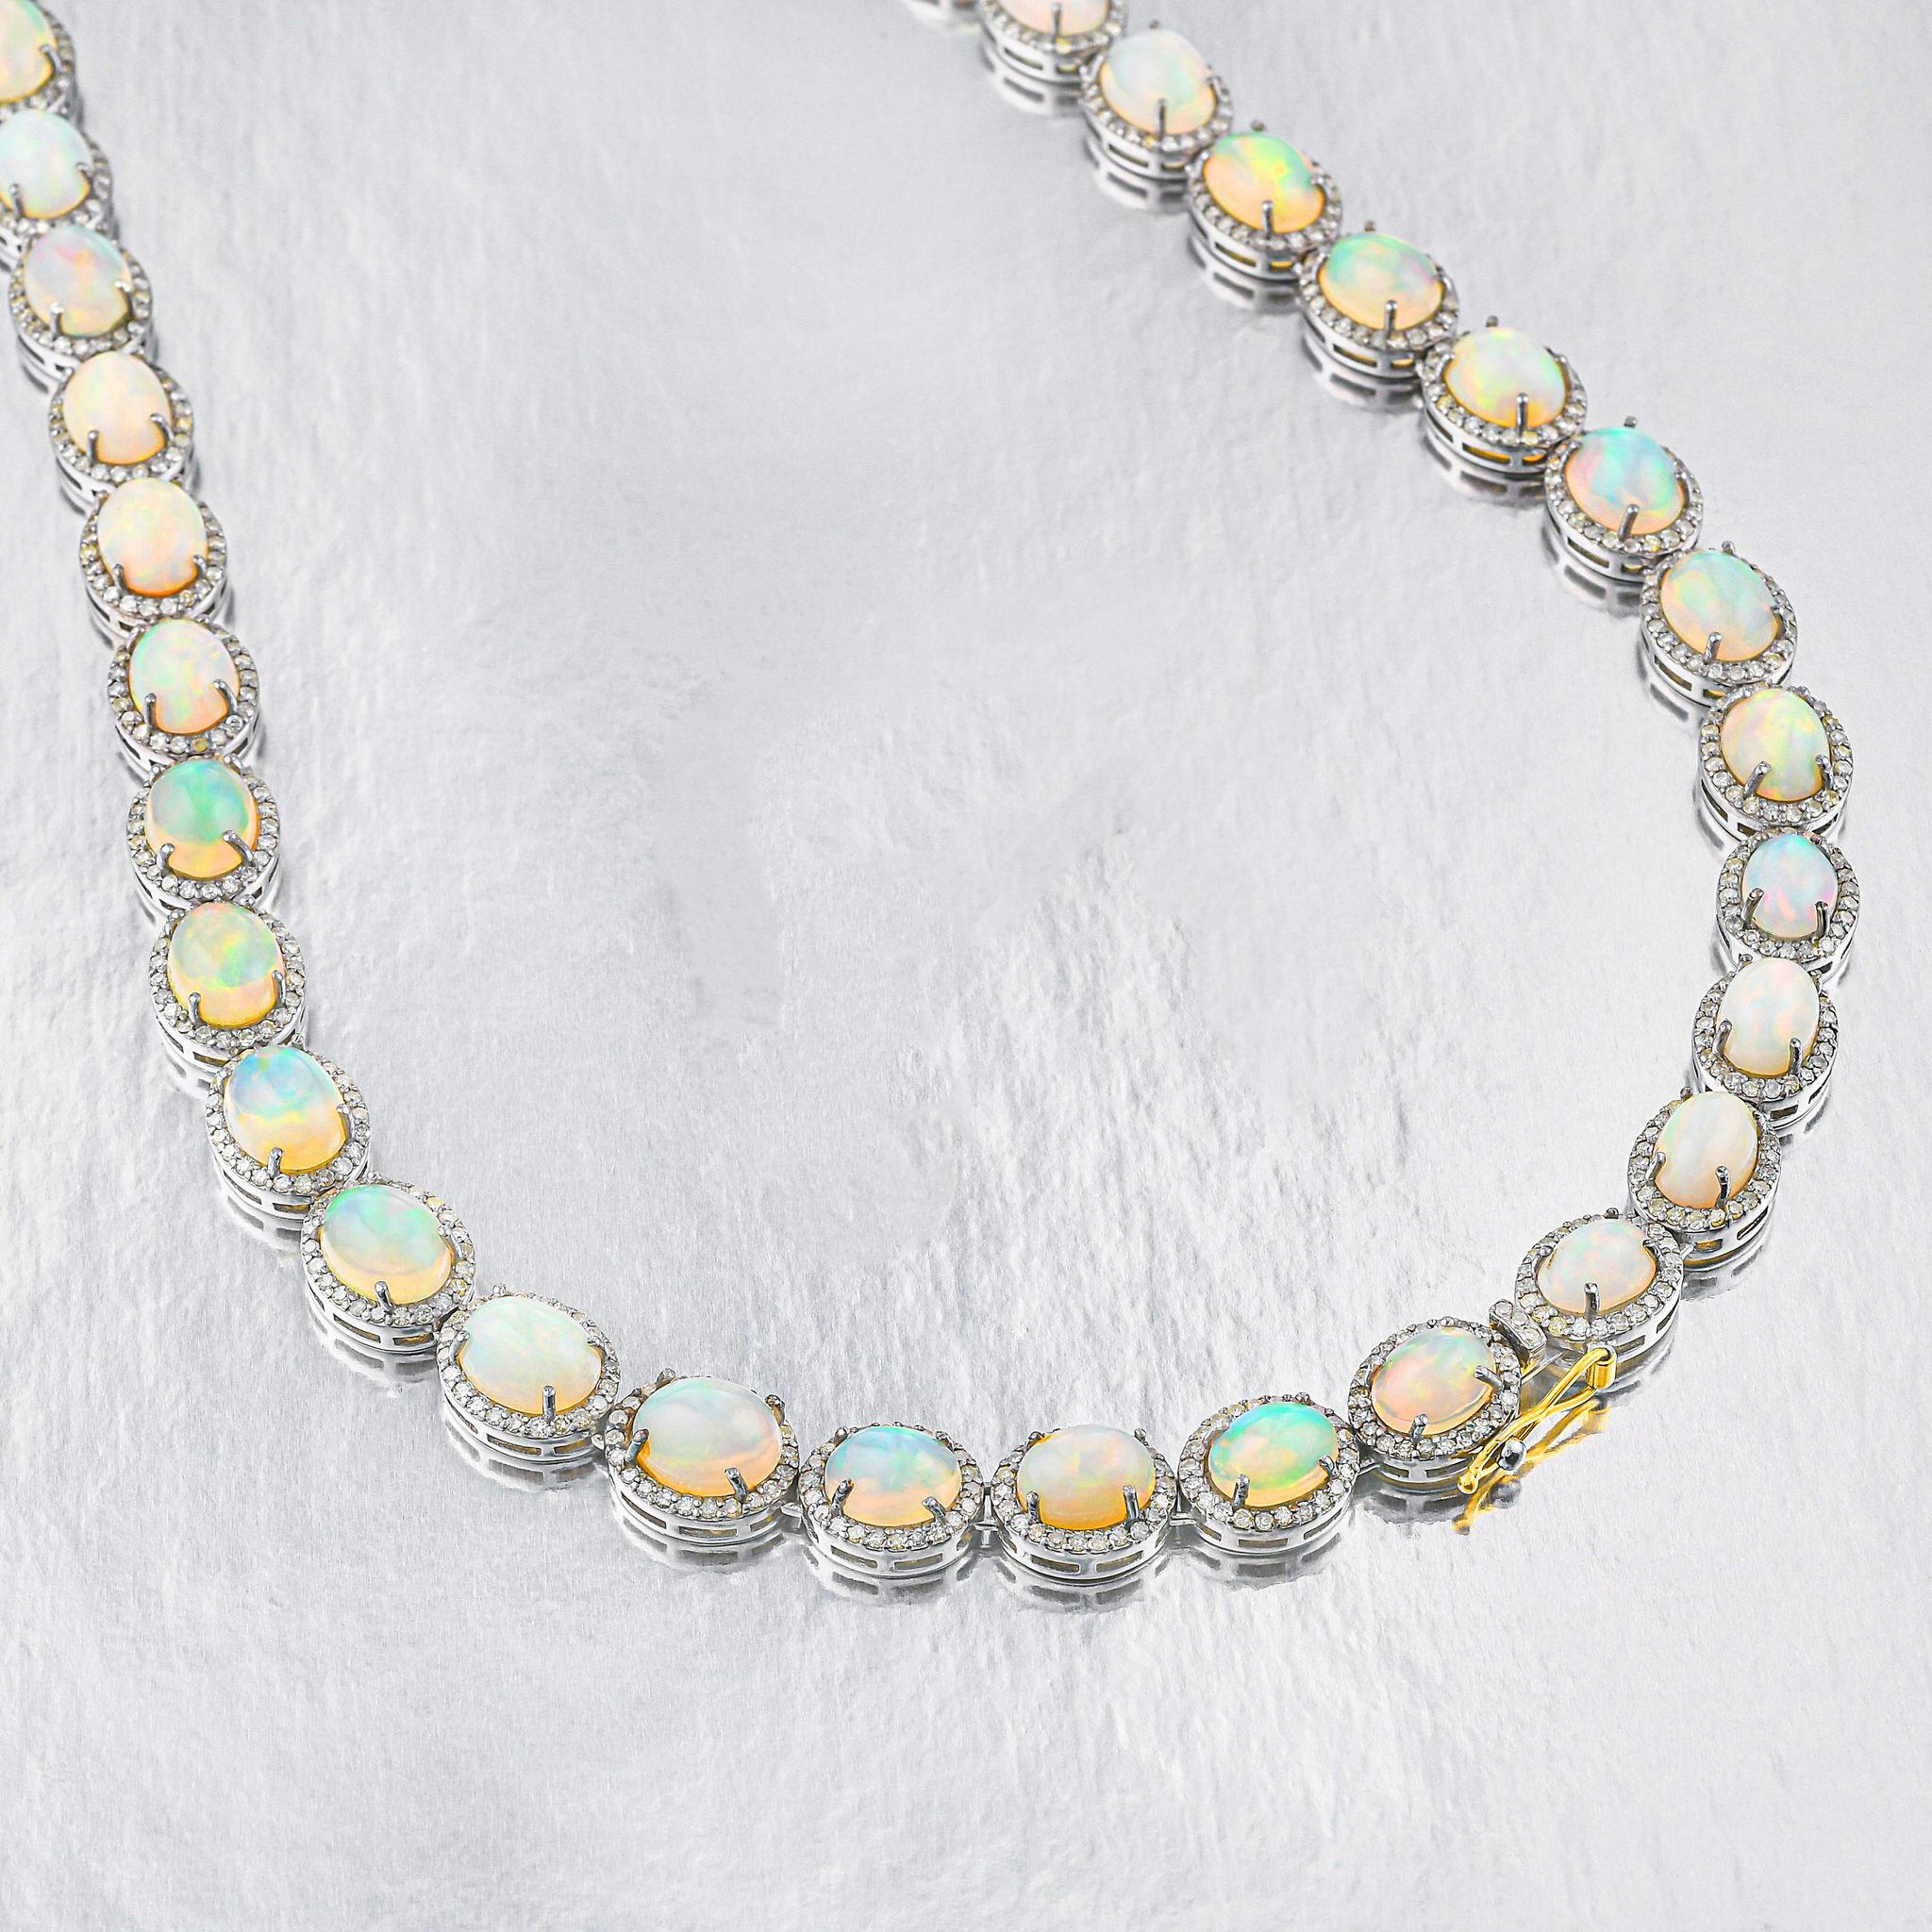 Cabochon Important Opal Necklace Set With Diamonds 60 Carats Total 19.5 Inches For Sale